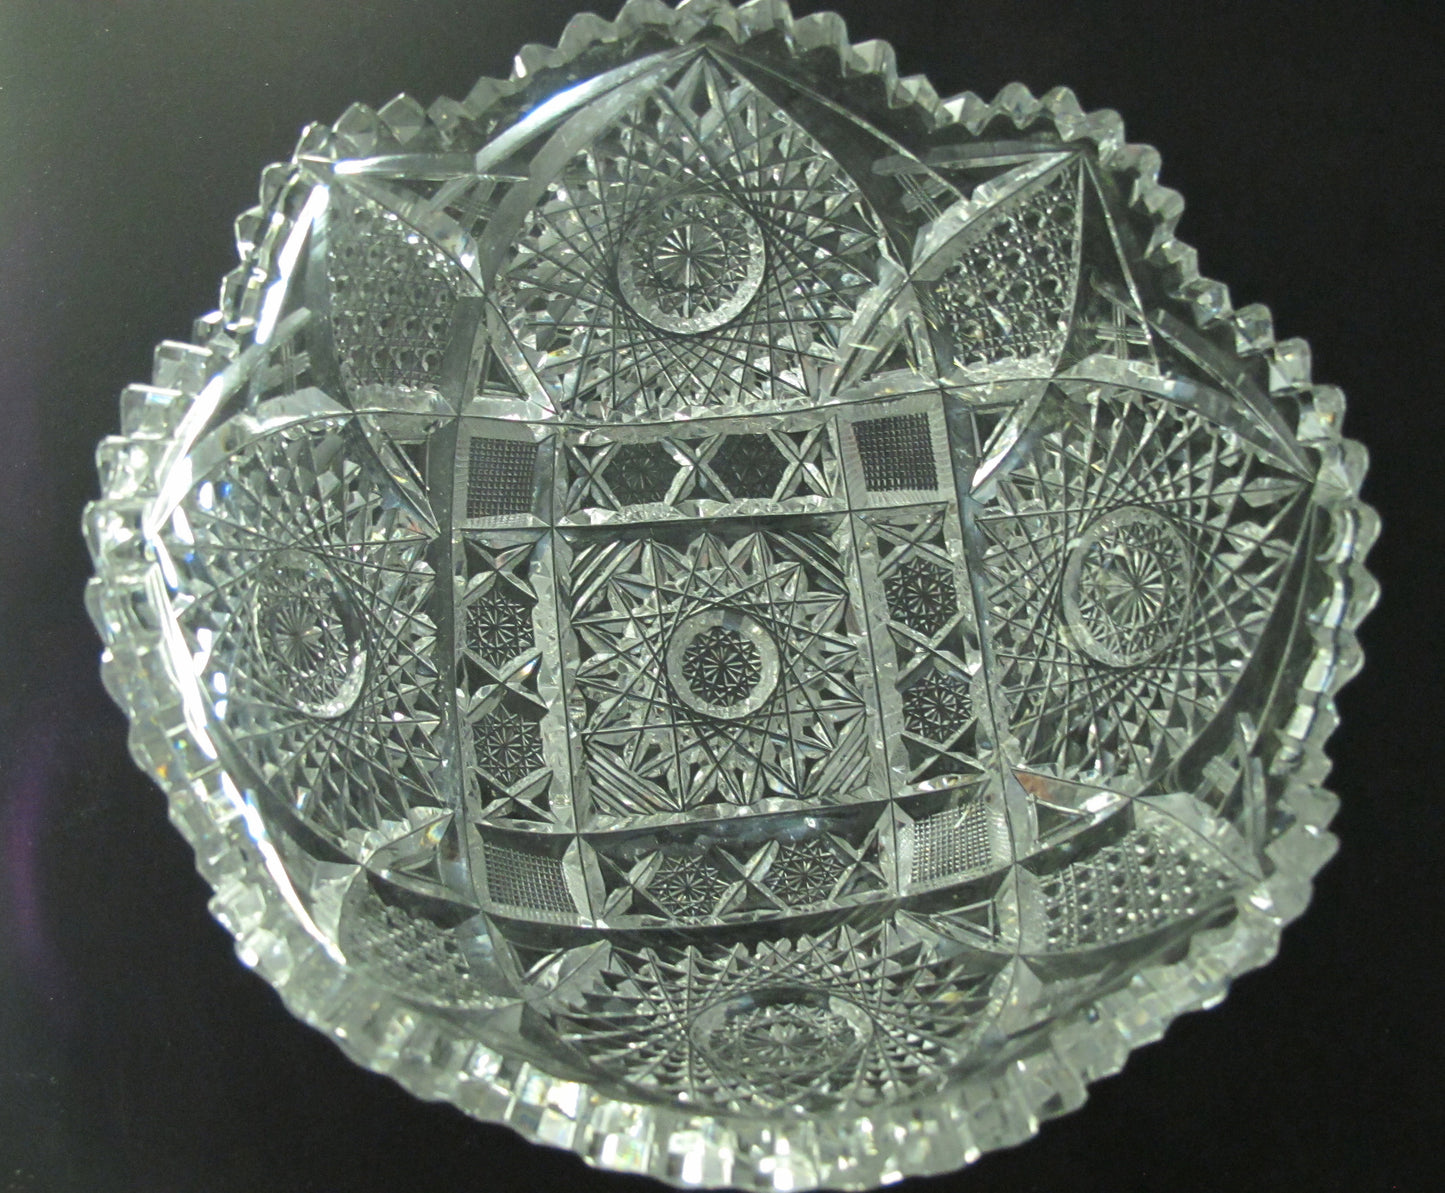 American Brilliant Period Cut Glass  ABP  Antique 8" bowl Made in USA - O'Rourke crystal awards & gifts abp cut glass